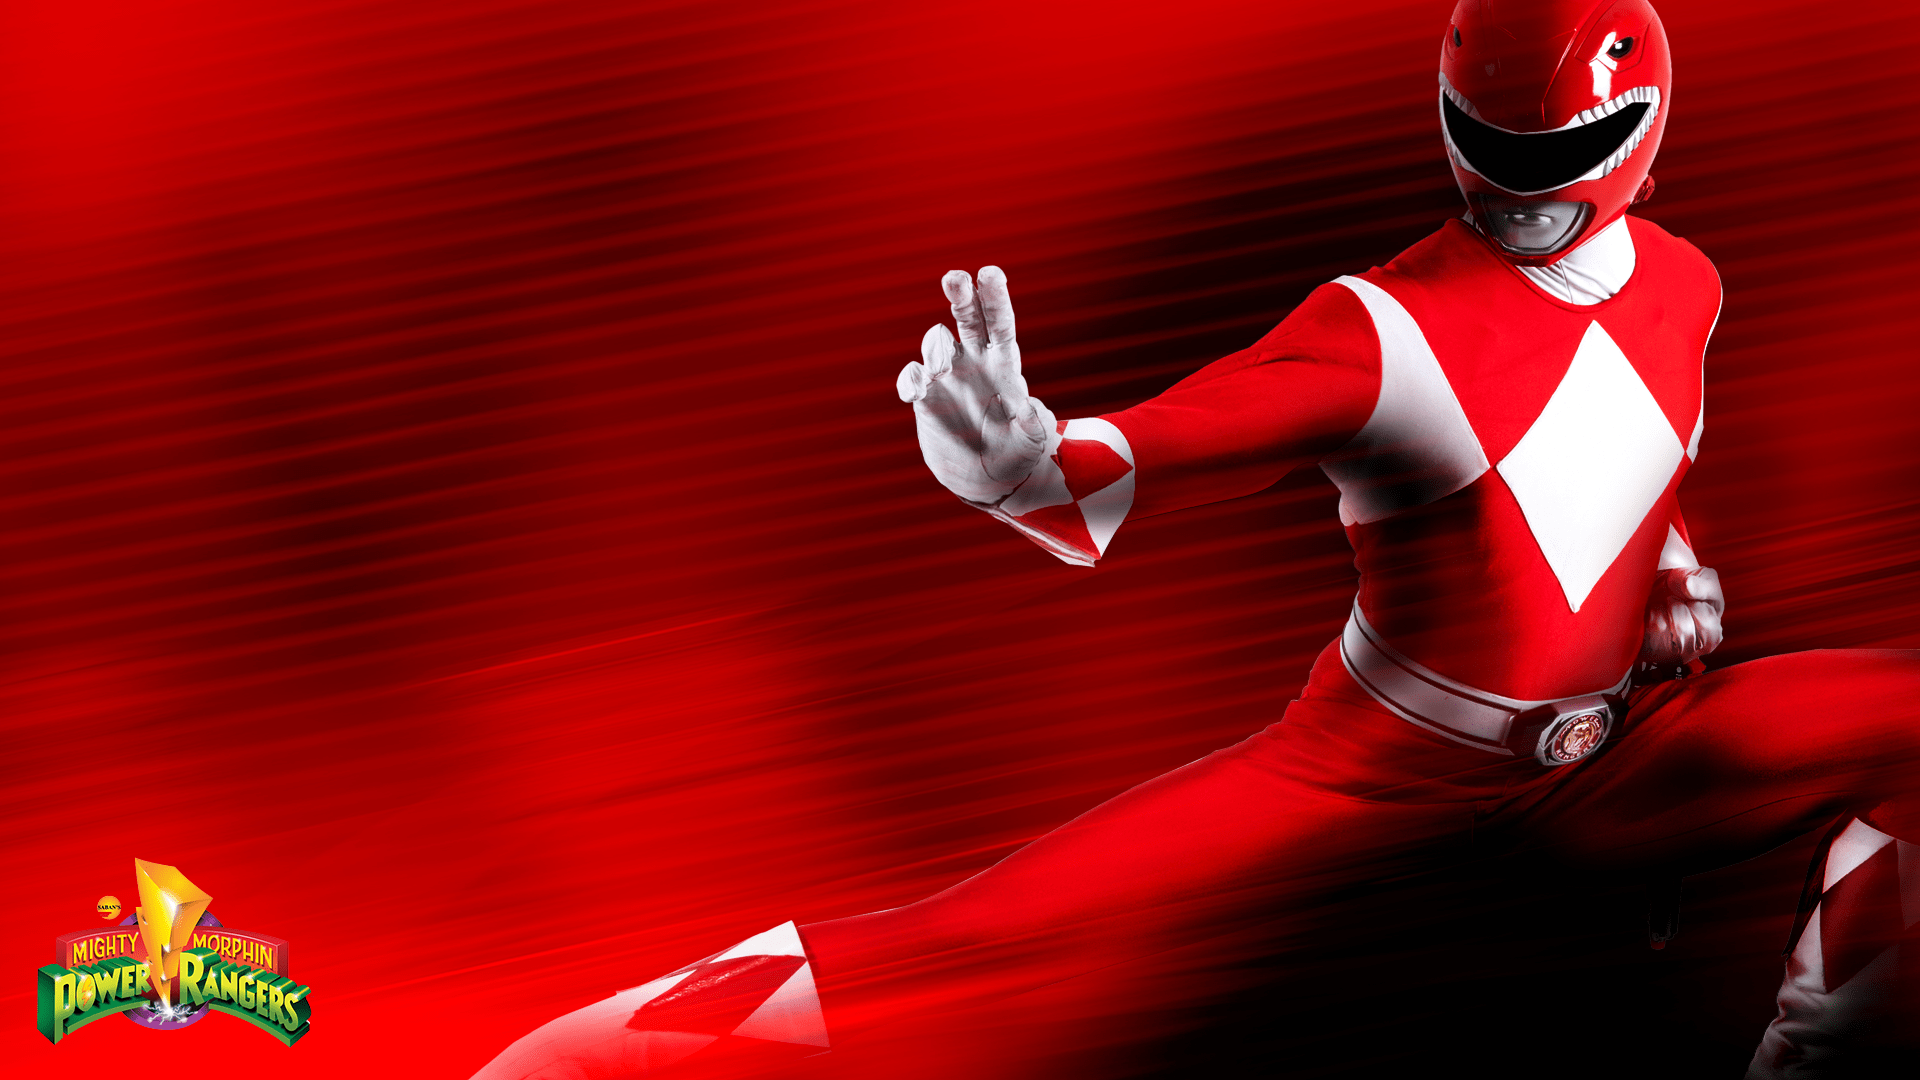 Red Ranger Wallpapers - Top Free Red Ranger Backgrounds - WallpaperAccess